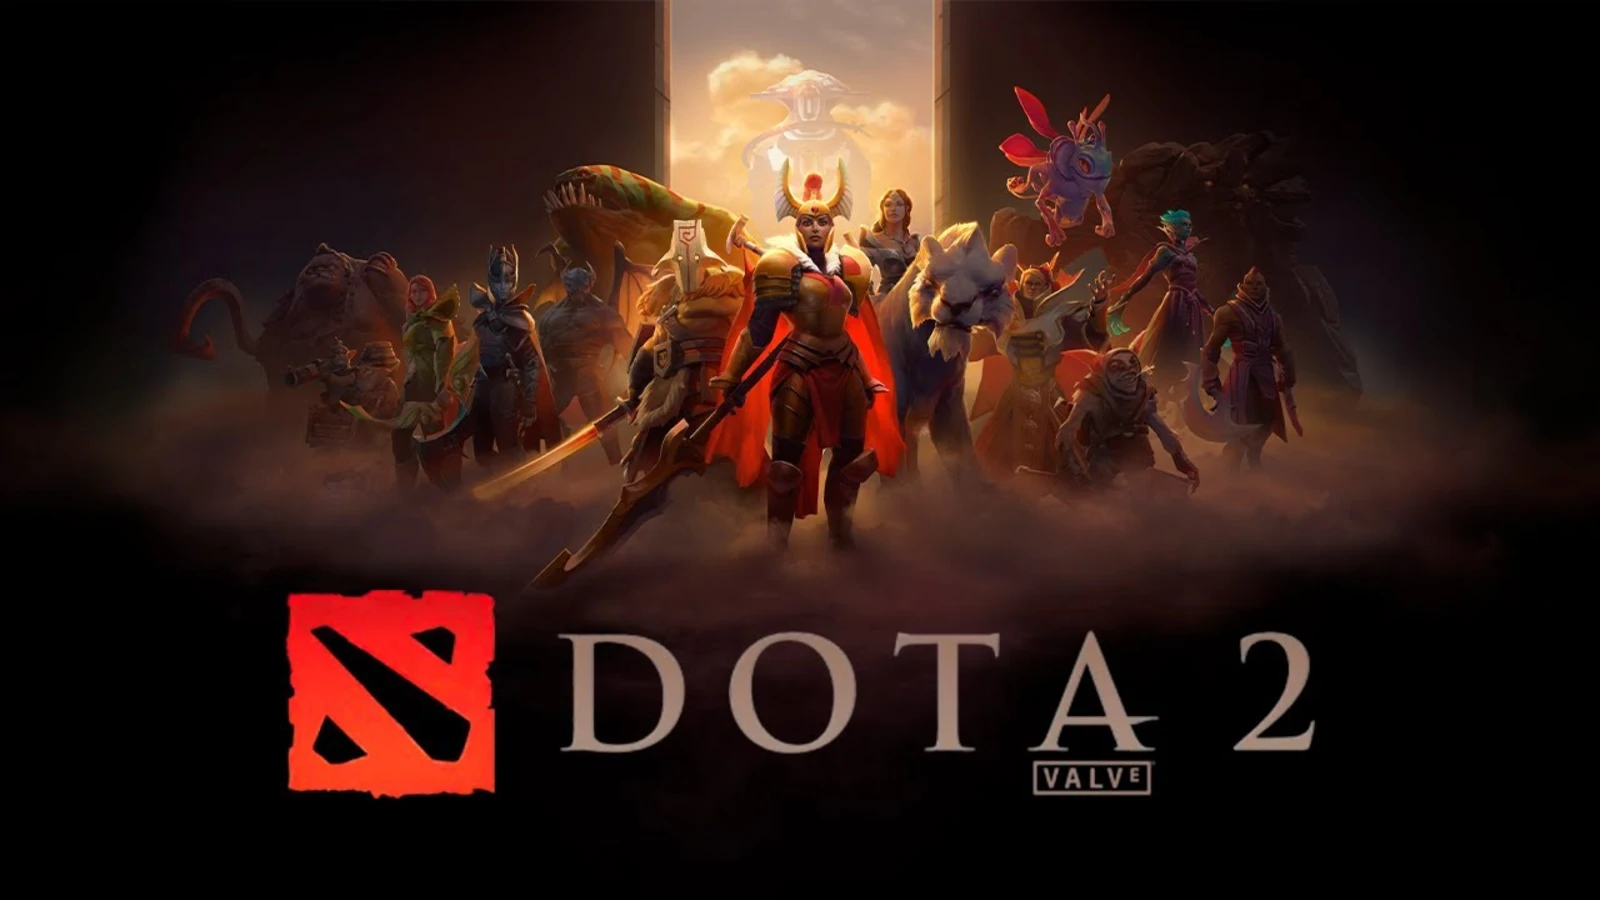 Dota 2 in-game guides not showing up? You are not alone